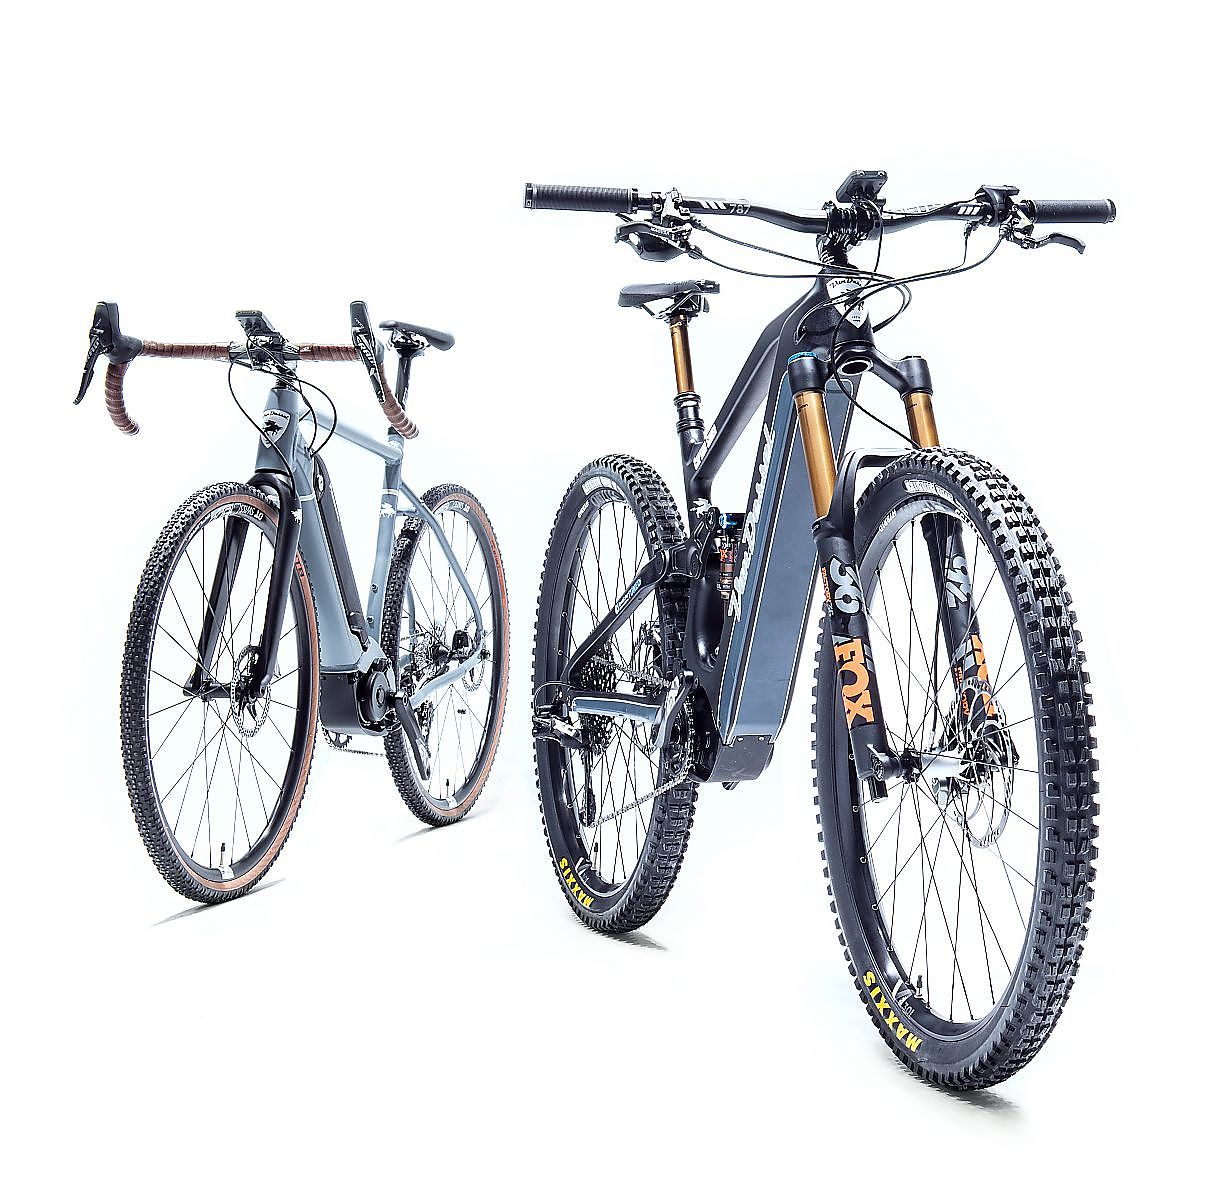 Panasonic takes new approach to US e-bike market with Kent